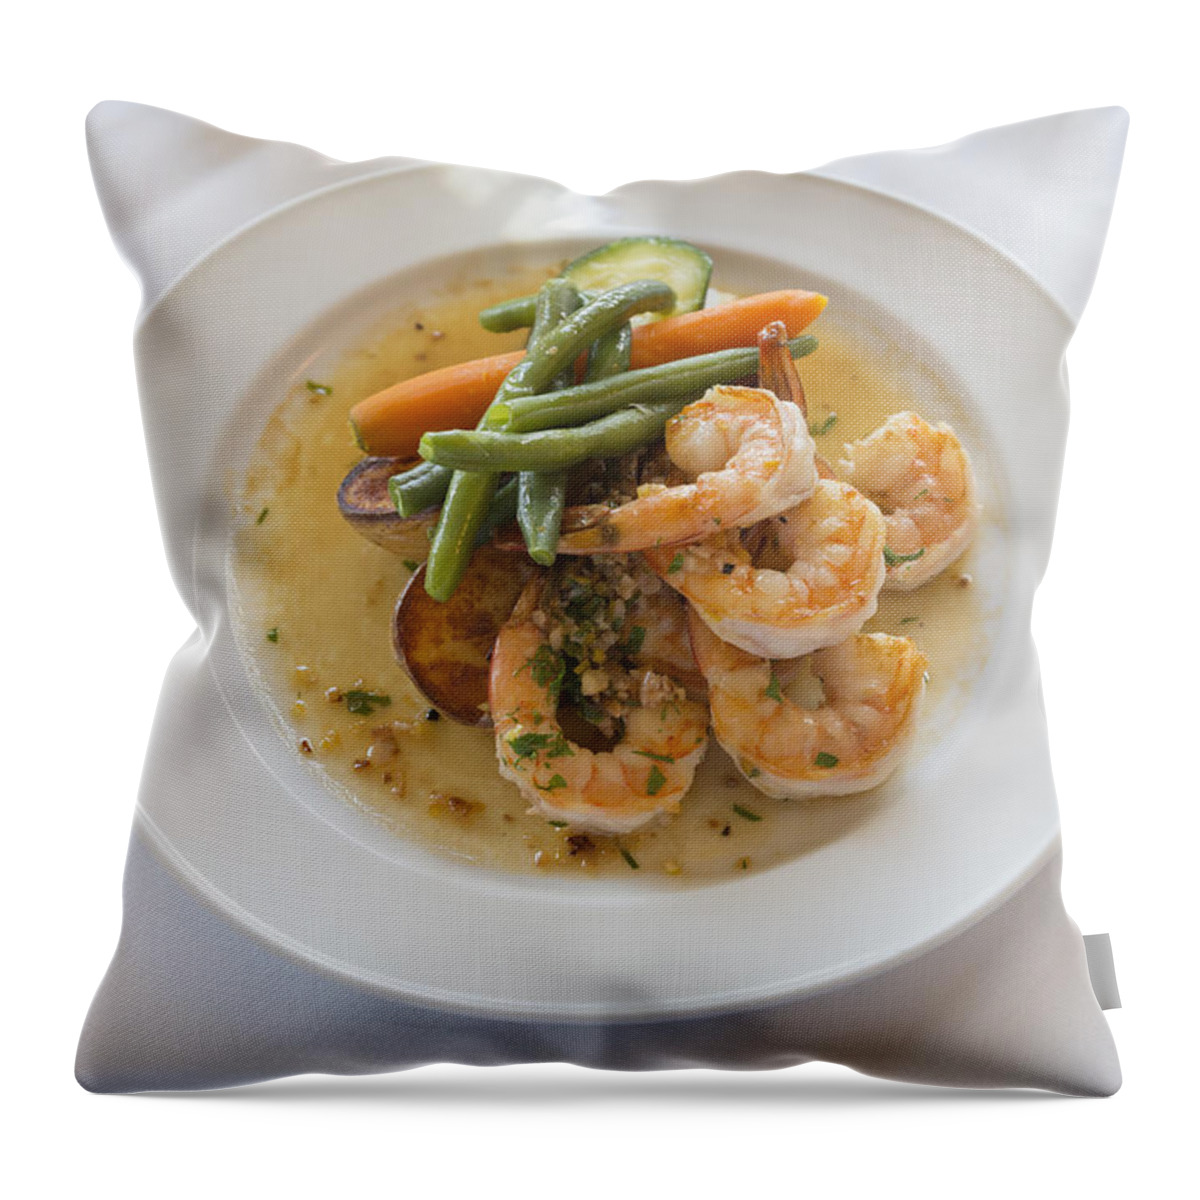 Prawns Throw Pillow featuring the photograph Garlic Prawns by Louise Heusinkveld